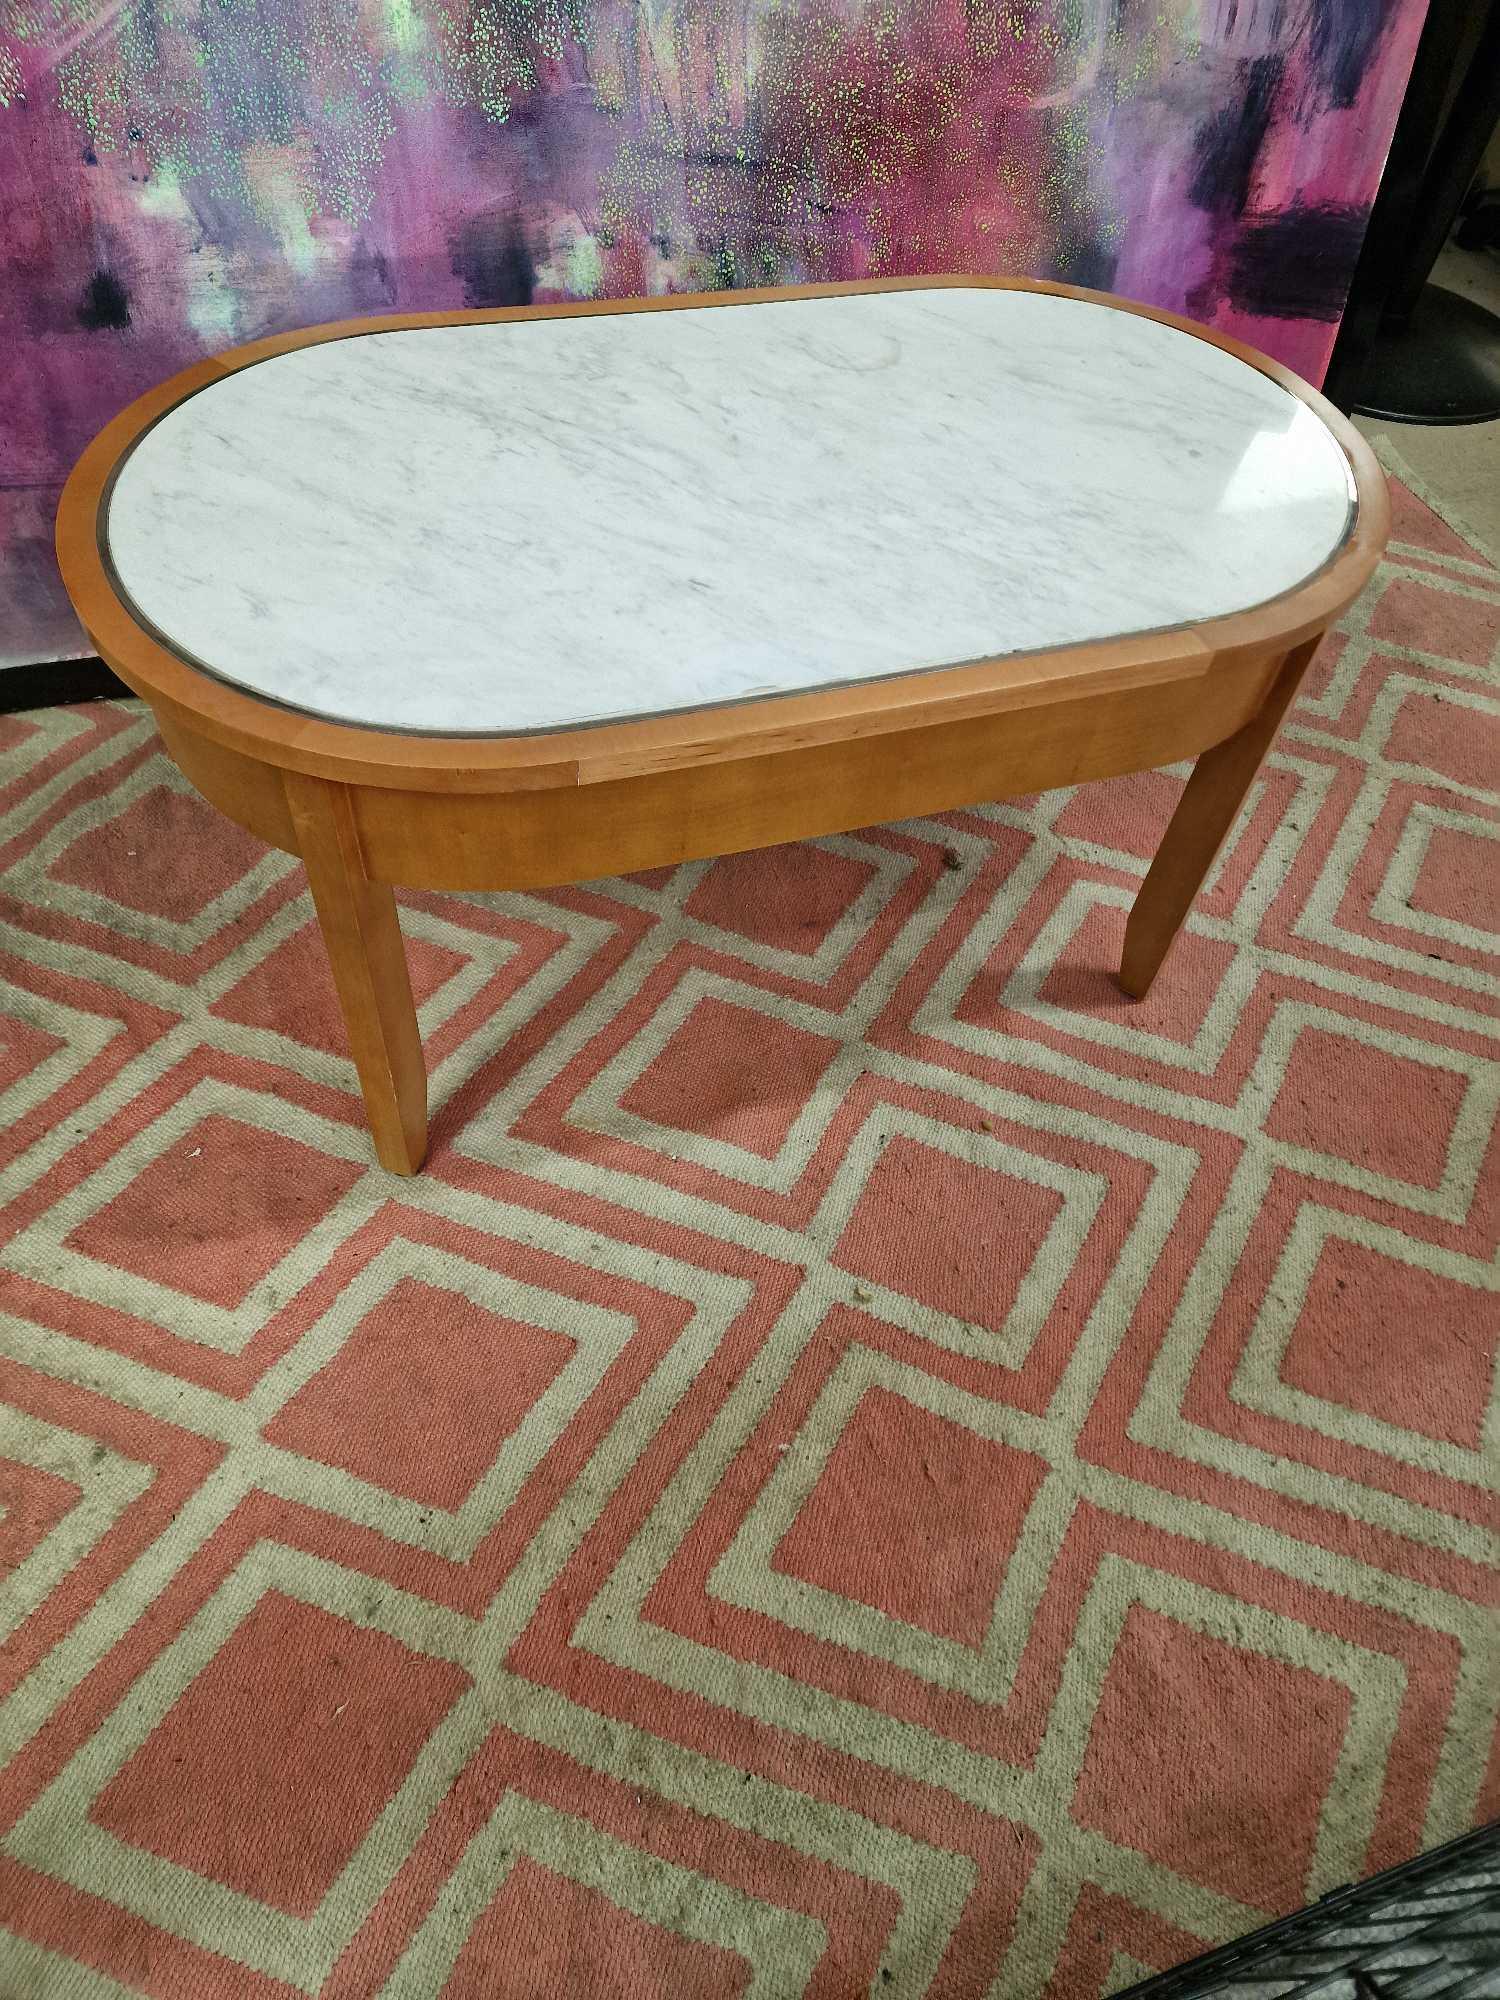 Coffee table oak oval table with a white marble top inset enhanced by silver metal trim 100 x 55 x